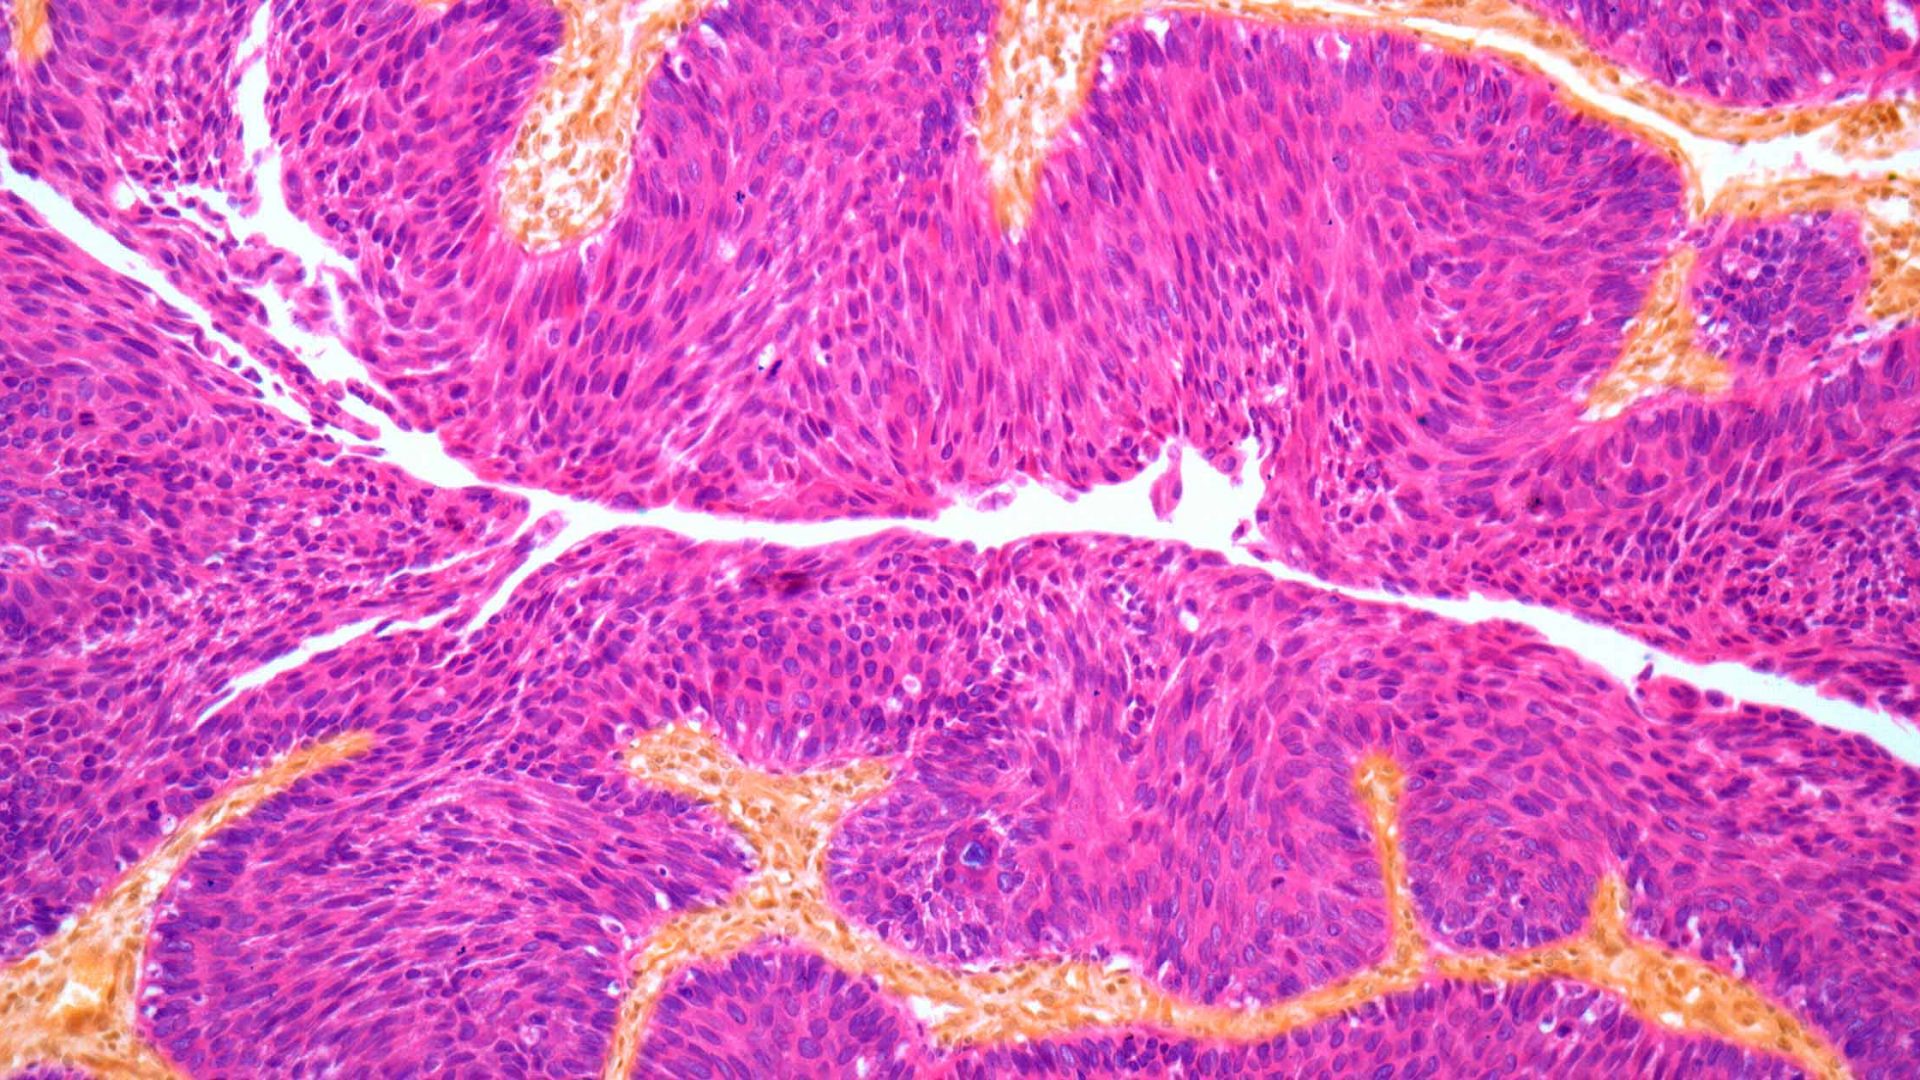 Light Micrograph of Section Through a Transitional Cell Carcinoma of the Bladder Wall